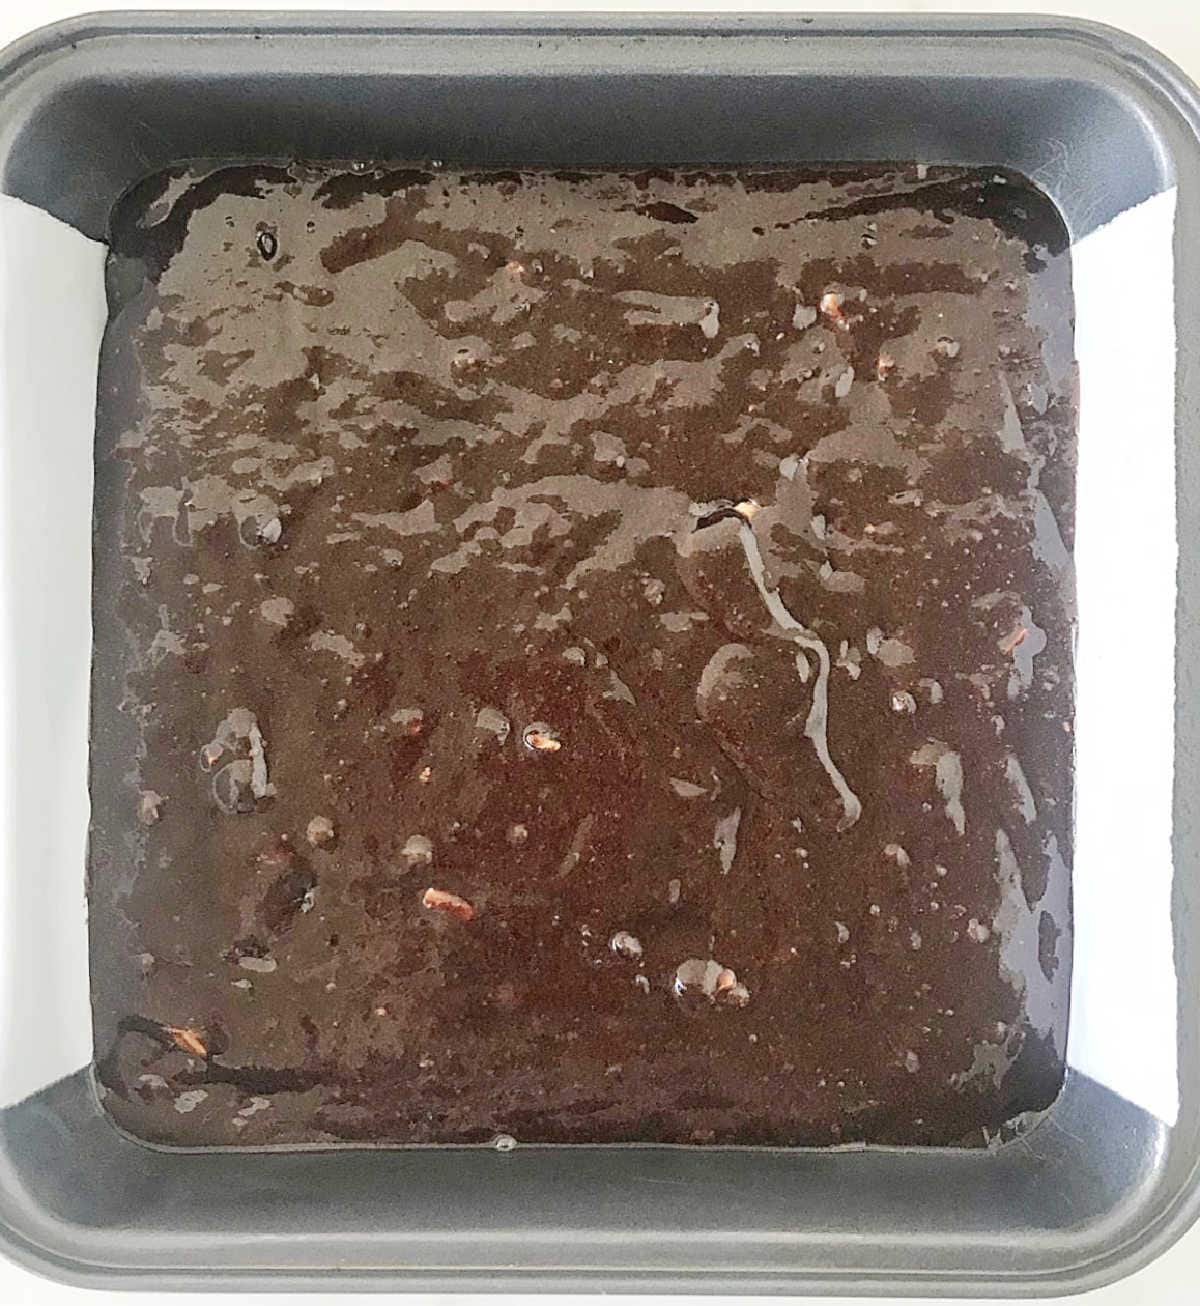 Unbaked brownie batter in metal square pan with parchment paper.